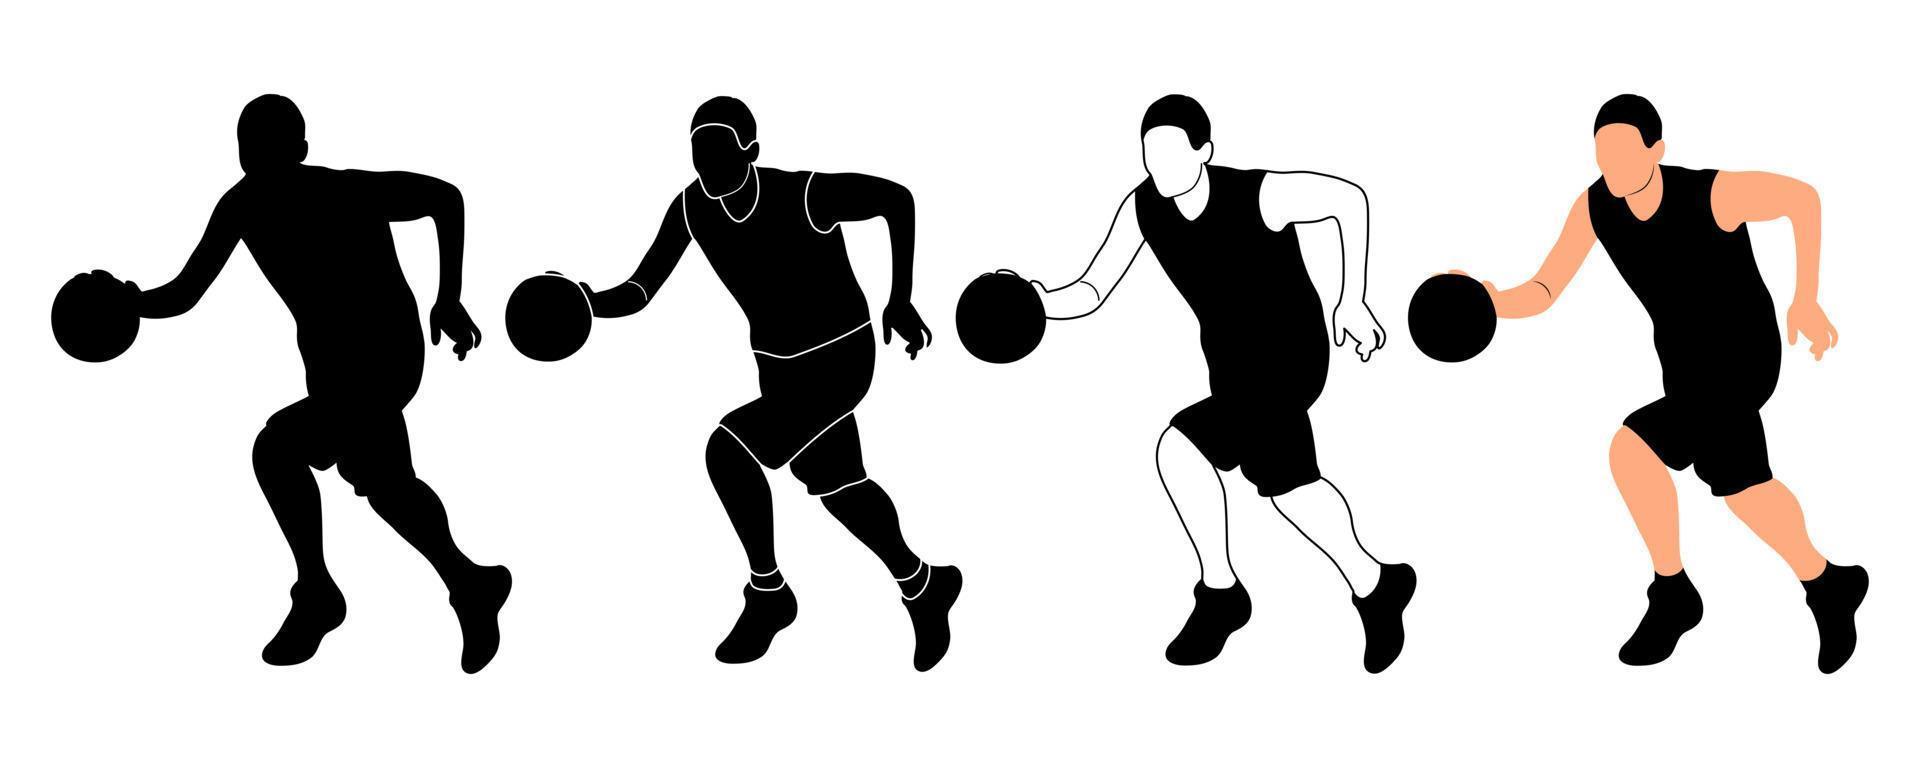 Outline silhouette of an athlete basketball player in a ball game. Basketball. vector